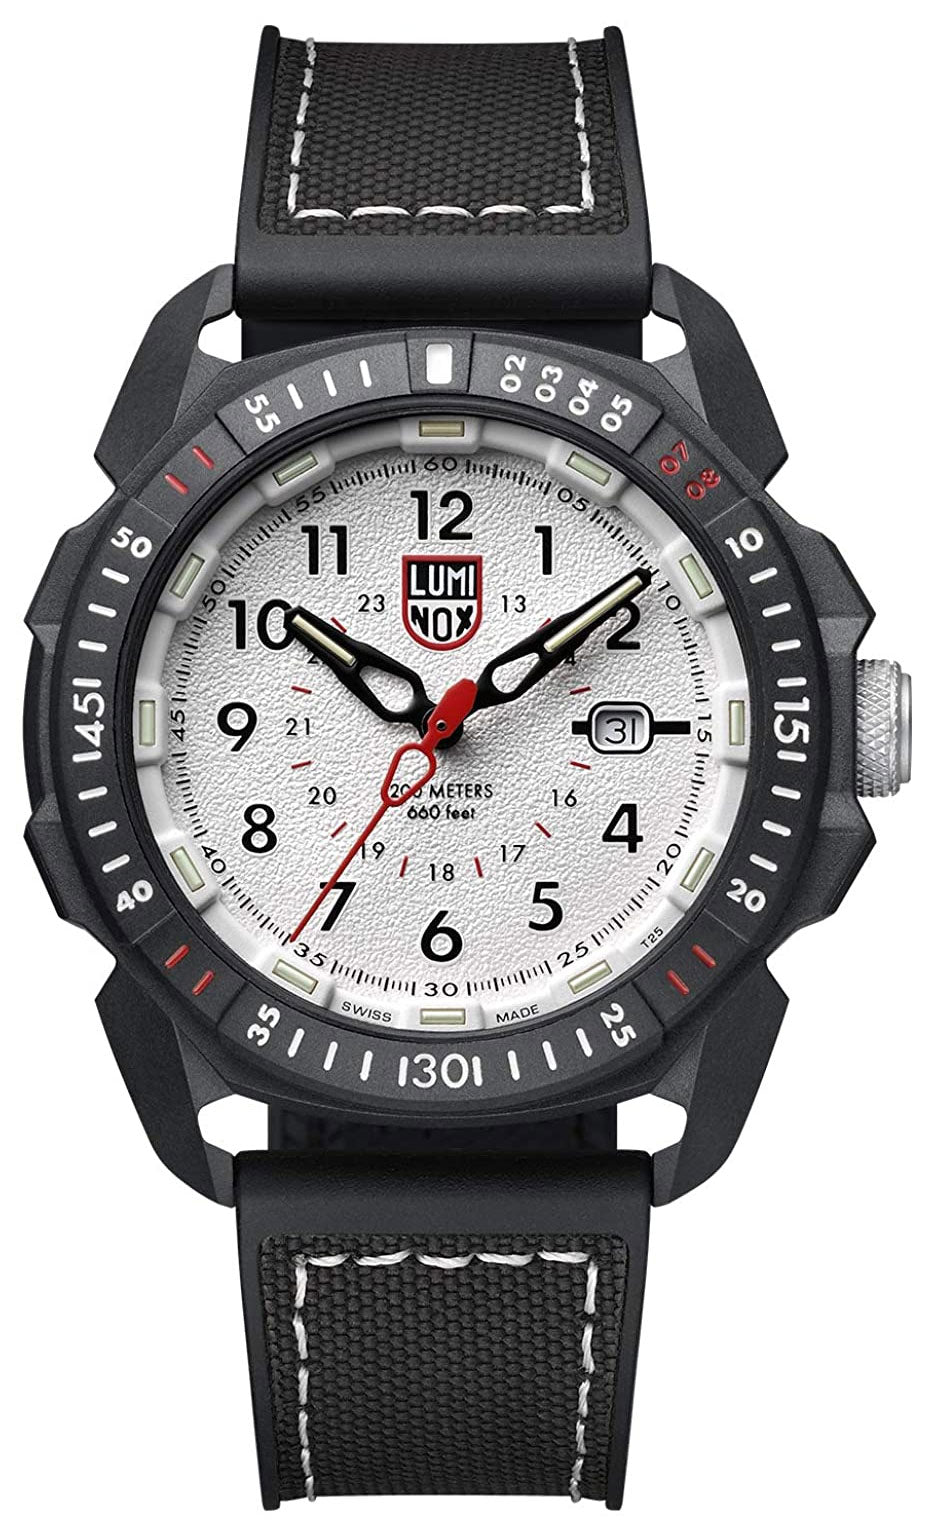 update alt-text with template Watches - Mens-Luminox-XL.1007-45 - 50 mm, CARBONOX case, date, divers, glow in the dark, ICE-SAR Arctic, Luminox, mens, menswatches, new arrivals, round, rpSKU_XL.1003, rpSKU_XL.1203, rpSKU_XL.1207, rpSKU_XL.1764, rpSKU_XS.3503.NSF, rubber, swiss quartz, watches, white-Watches & Beyond